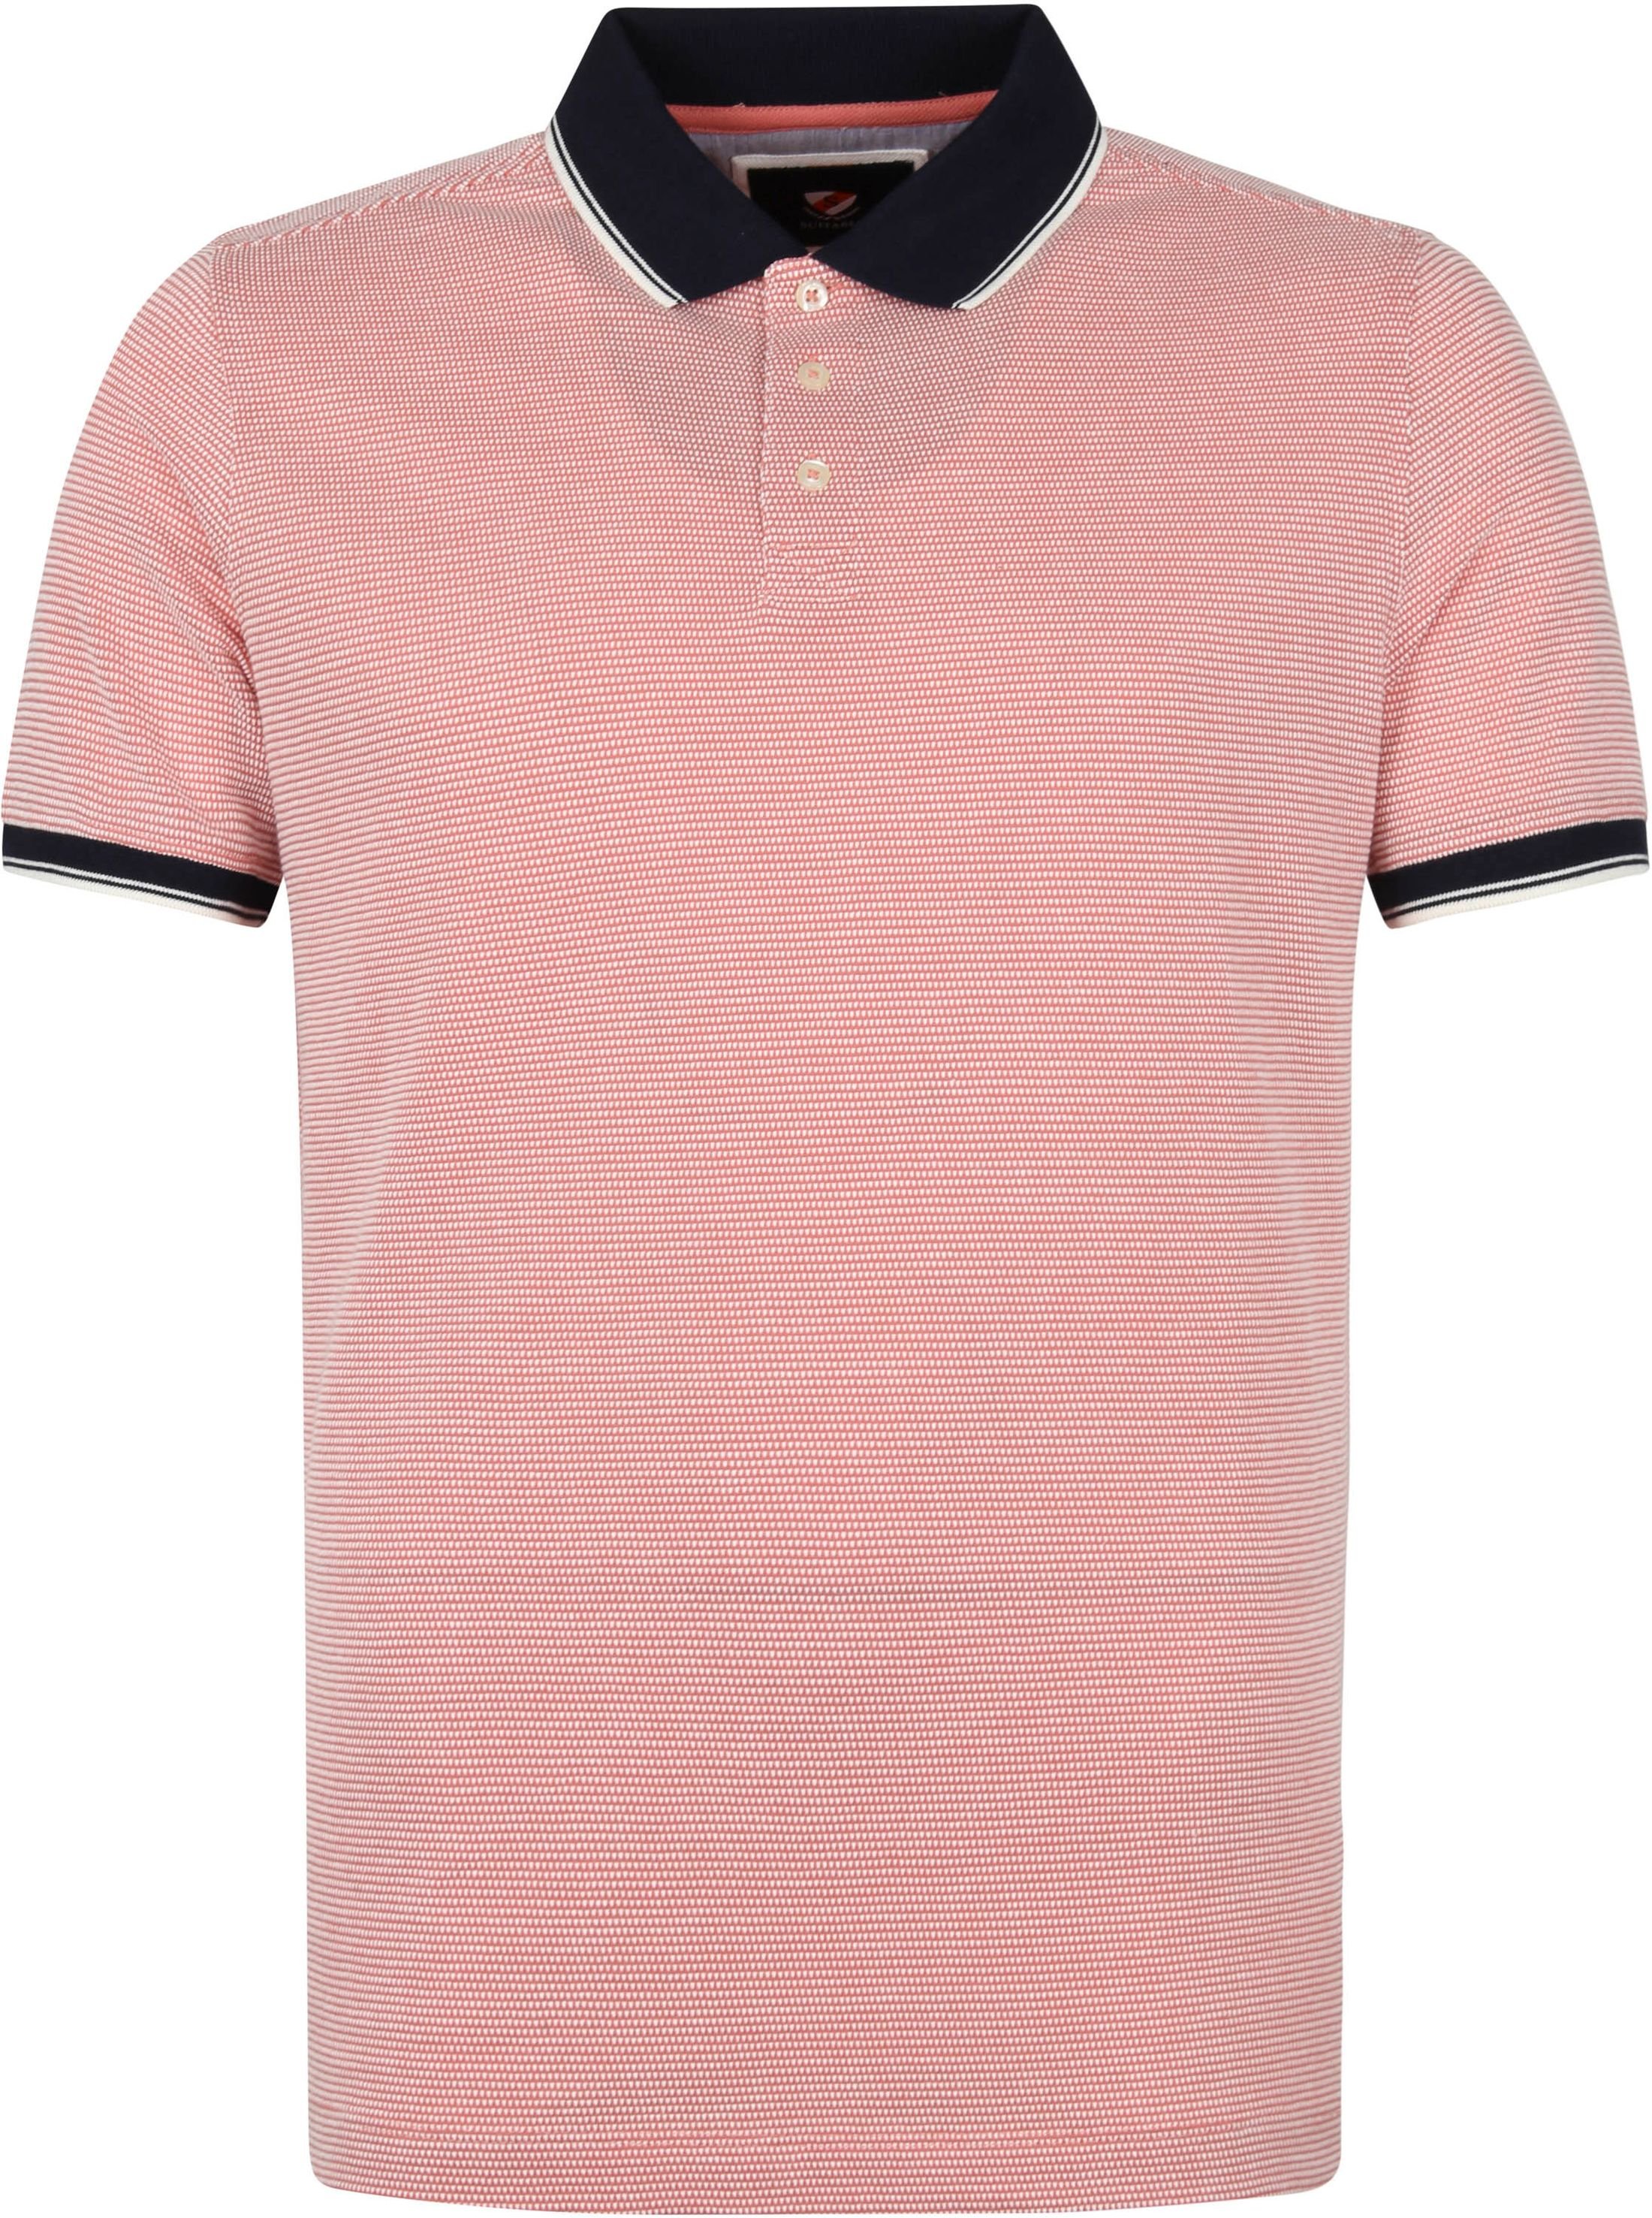 Suitable Oxford Polo Shirt Pink size 3XL